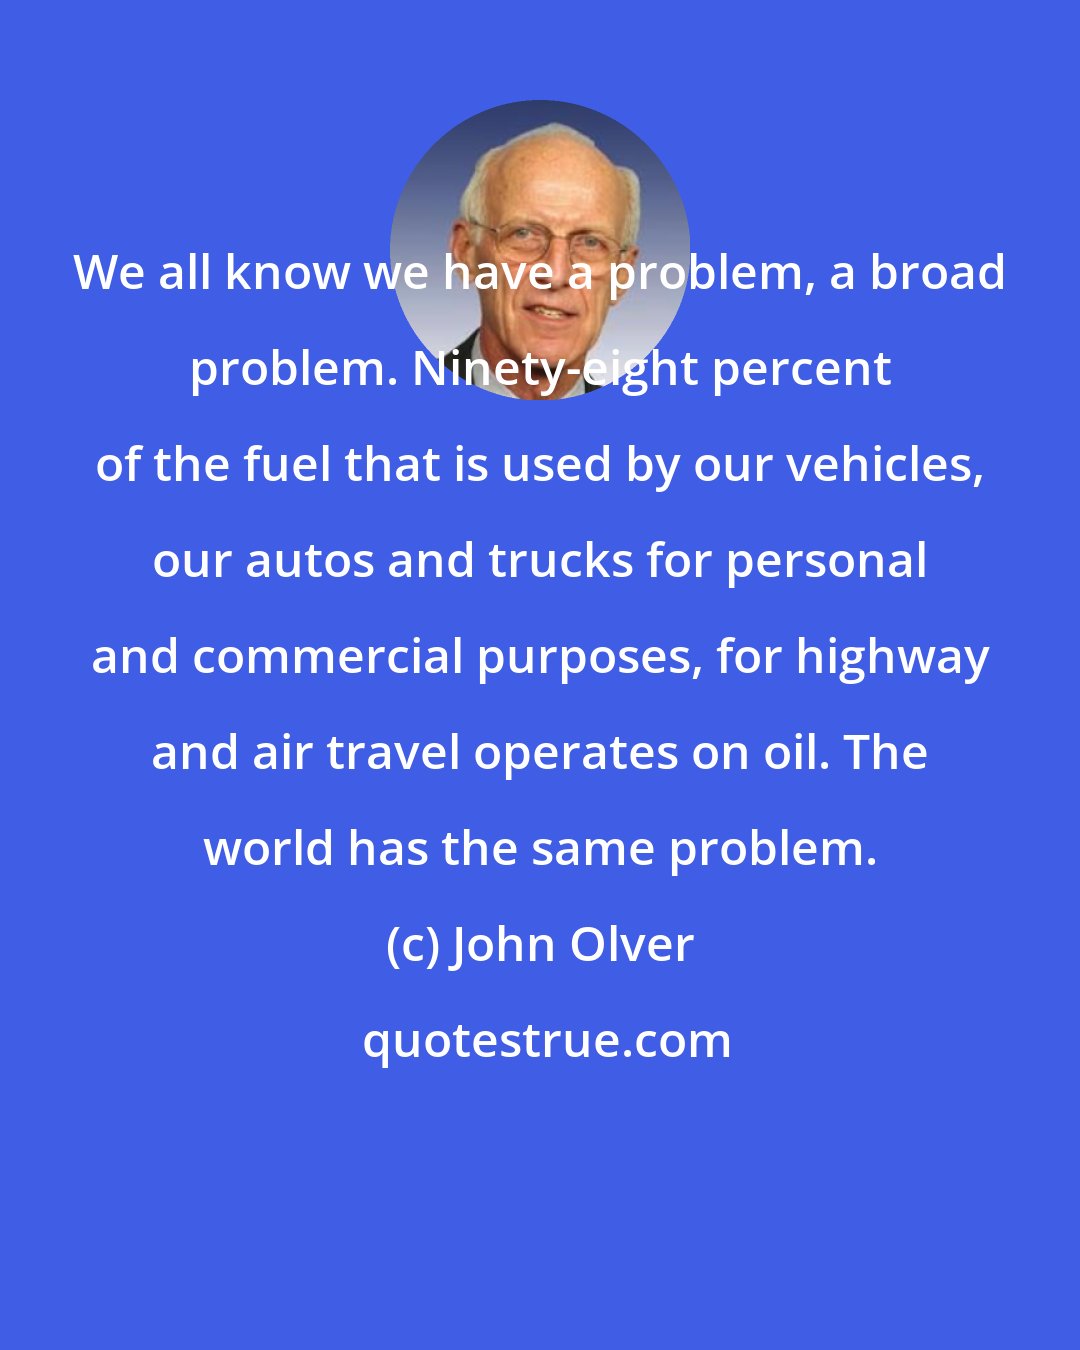 John Olver: We all know we have a problem, a broad problem. Ninety-eight percent of the fuel that is used by our vehicles, our autos and trucks for personal and commercial purposes, for highway and air travel operates on oil. The world has the same problem.